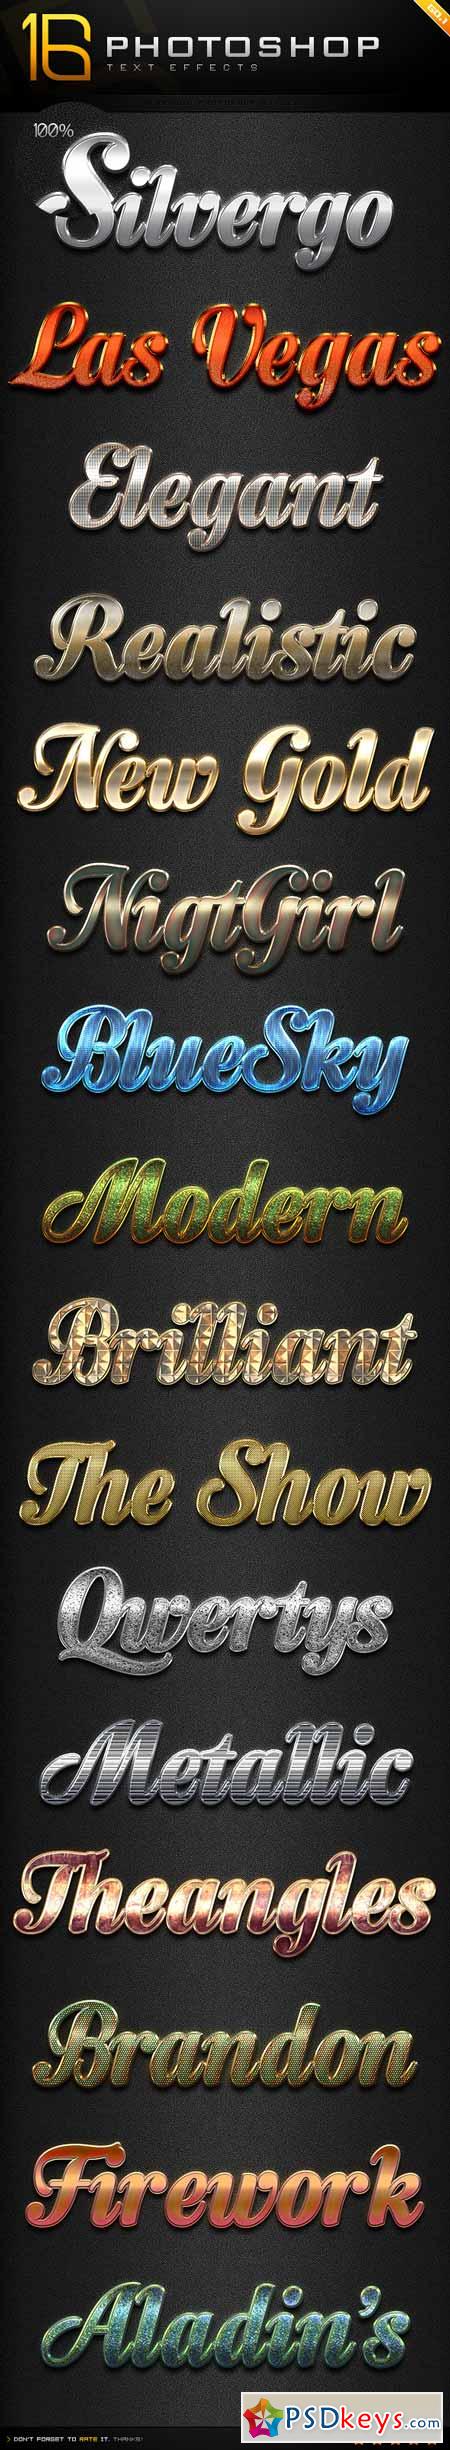 16 Photoshop Text Effect Styles GO.1 9810618